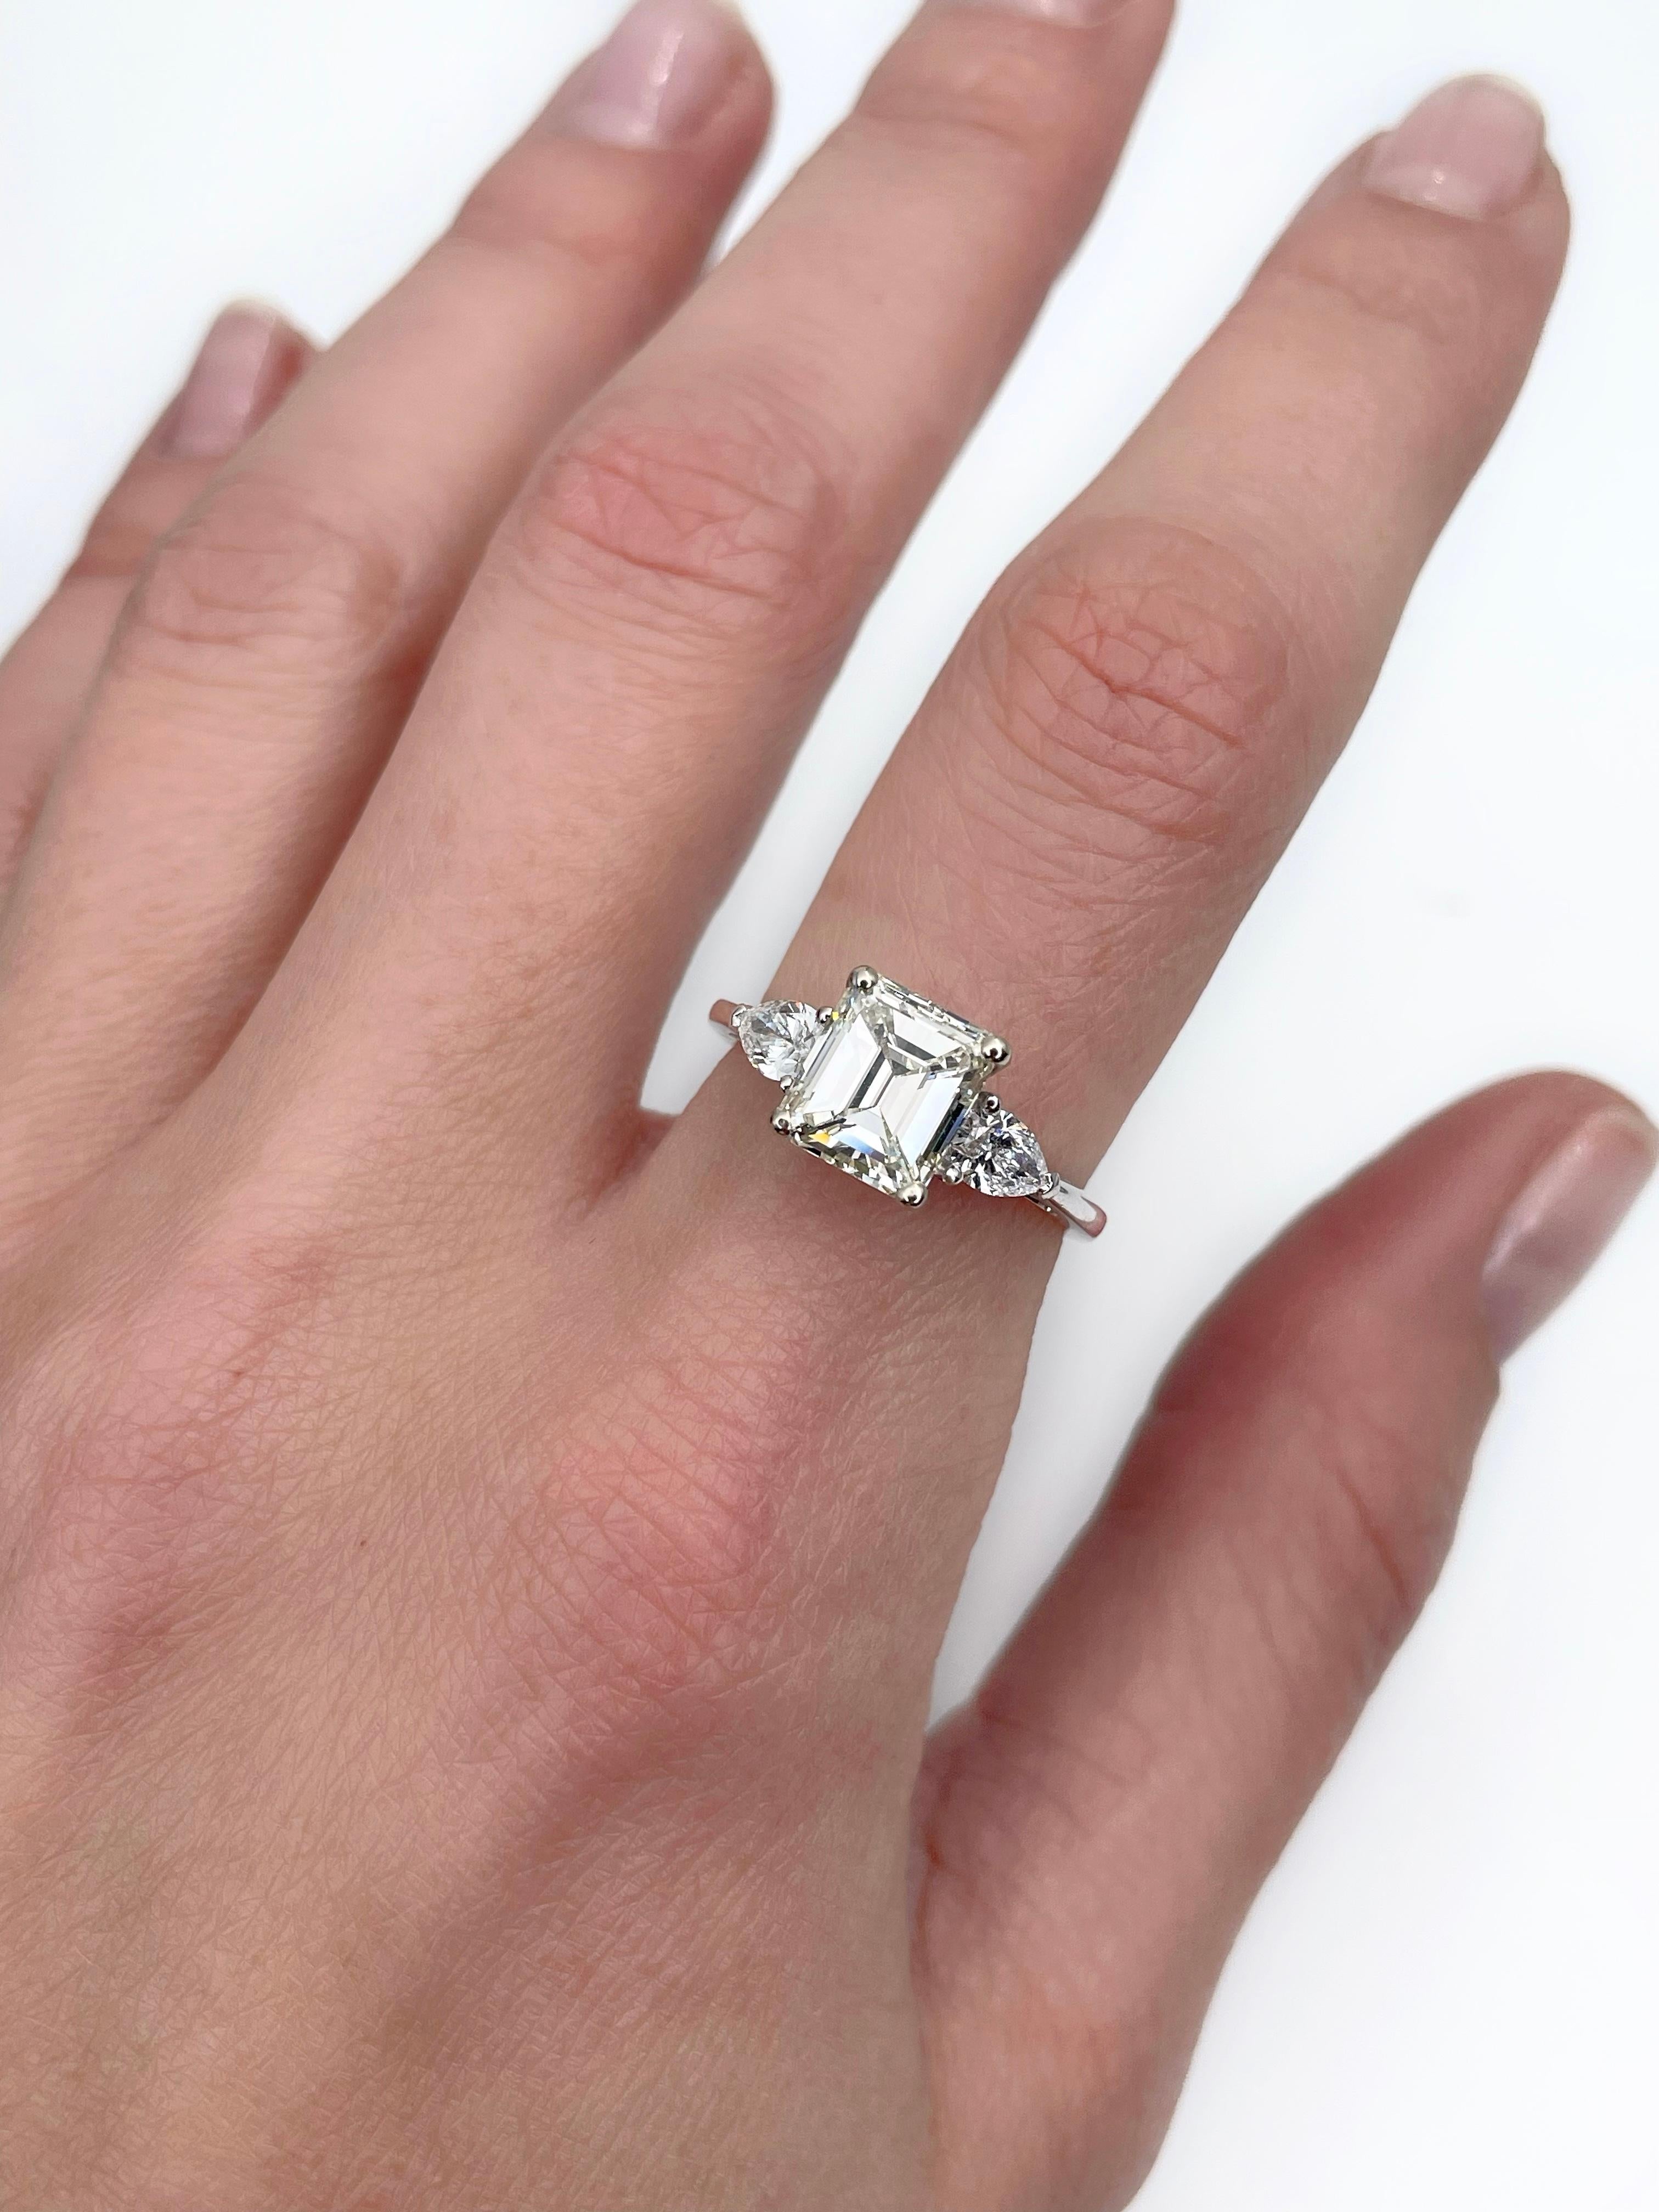 This is a magnificent engagement ring crafted in 18K white gold. It features 2.03ct central diamond and two pear shape diamonds (TW 0.42, G-H, SI). 

Circa 2020

The central diamond is certified by International Gemological Institute (can be found